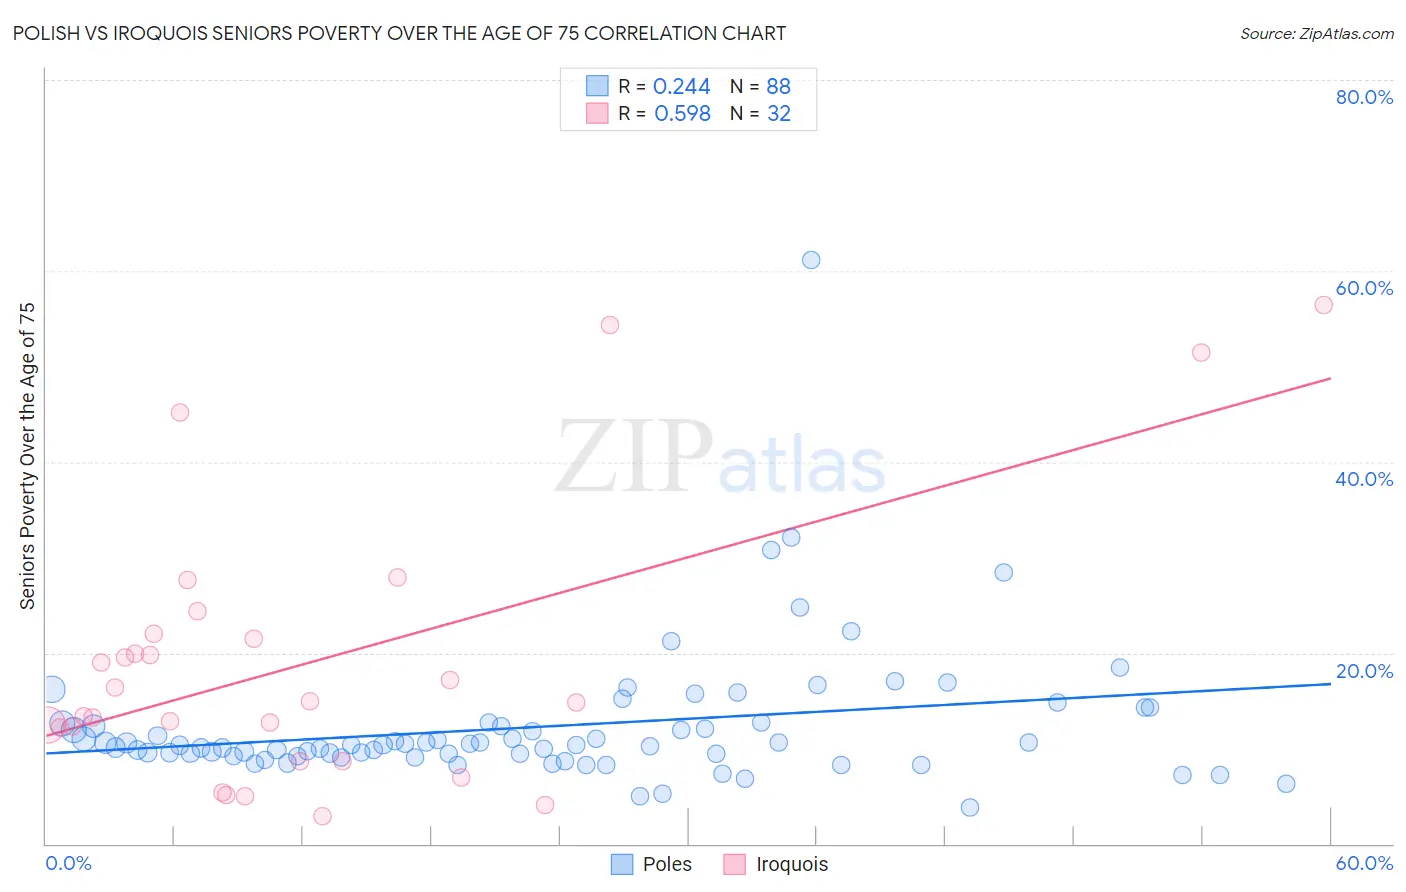 Polish vs Iroquois Seniors Poverty Over the Age of 75